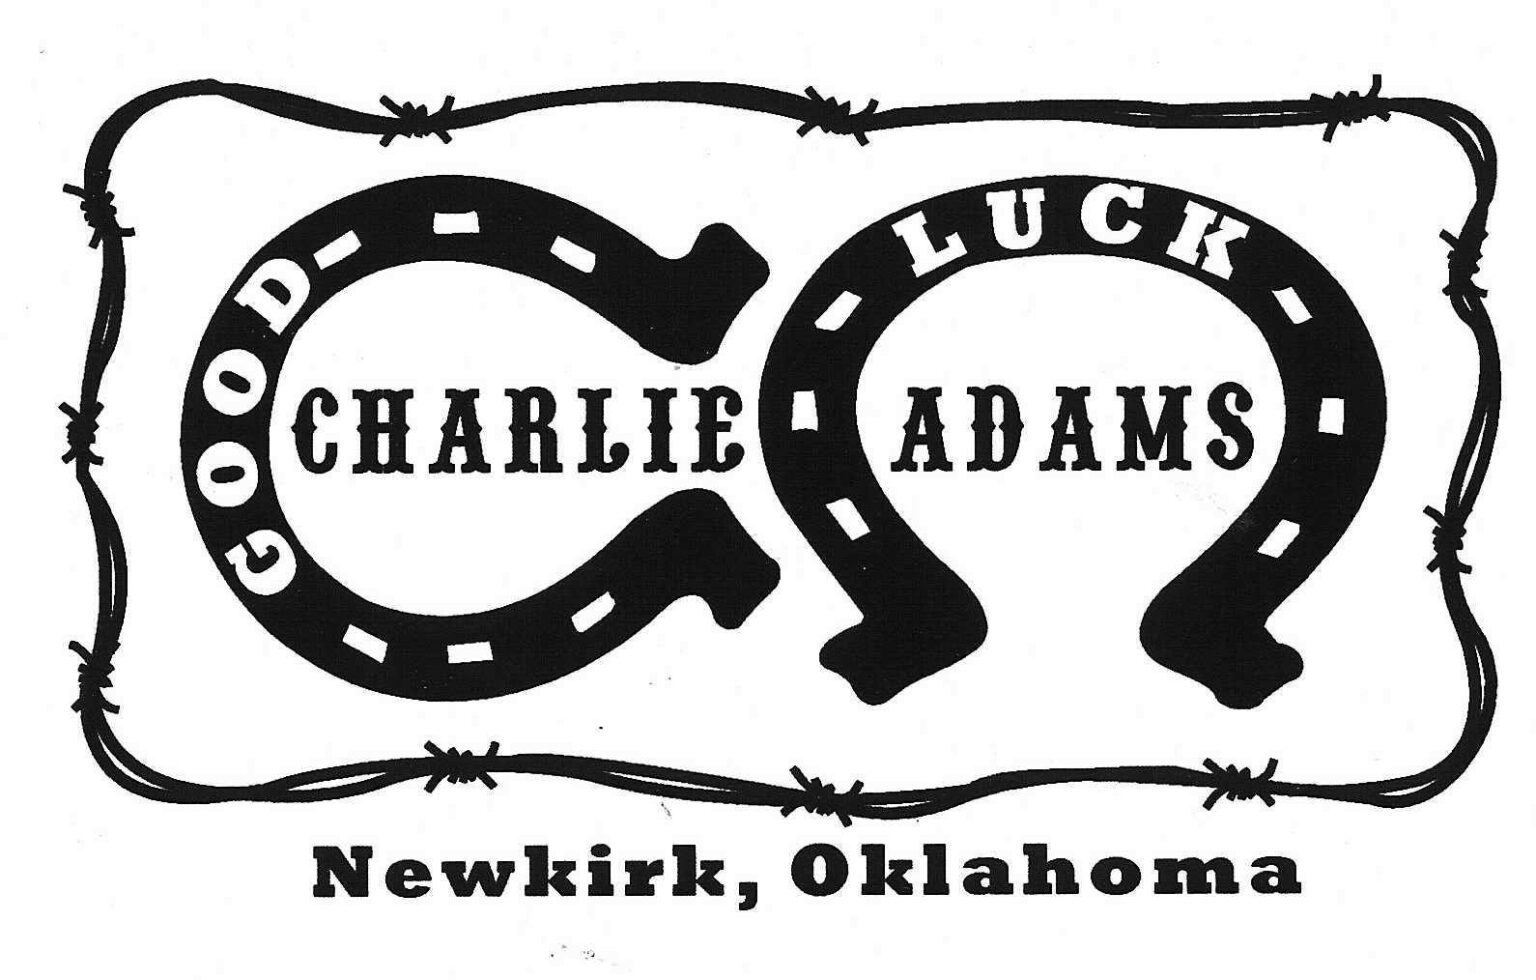 20th Annual Charlie Adams Day September 8 & 9 in Newkirk